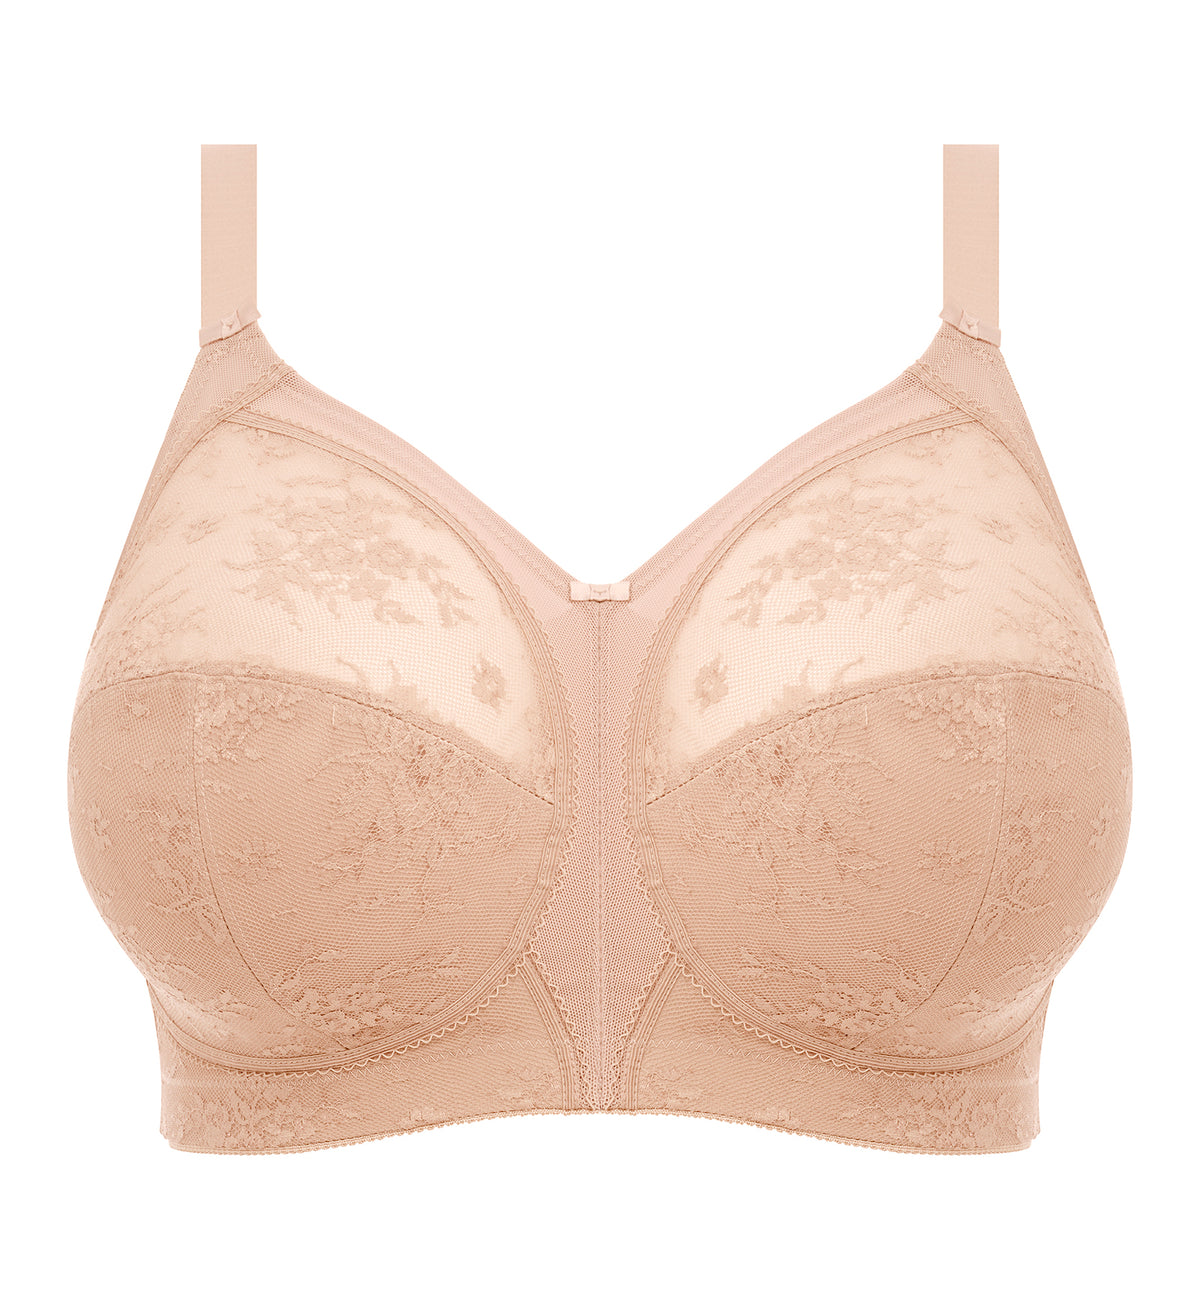 Goddess Verity Full Cup Non Wire Bra (700218),34I,Fawn - Fawn,34I